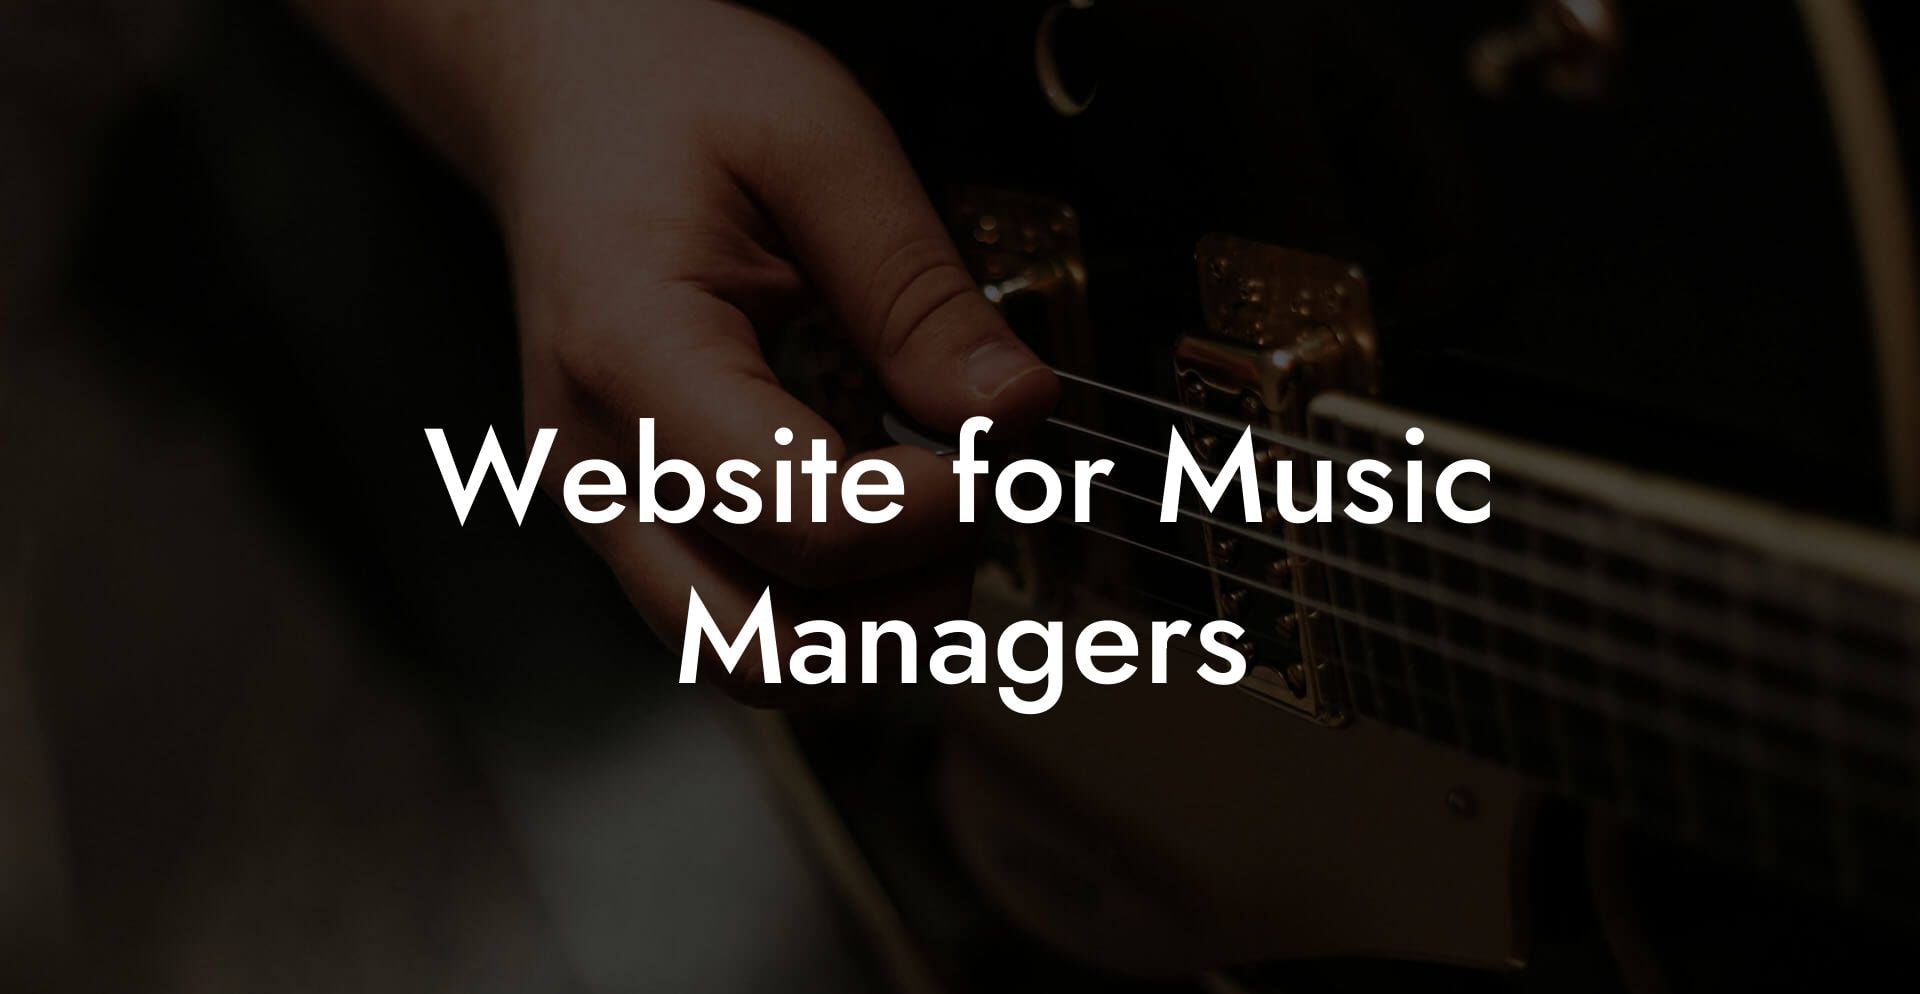 Website for Music Managers